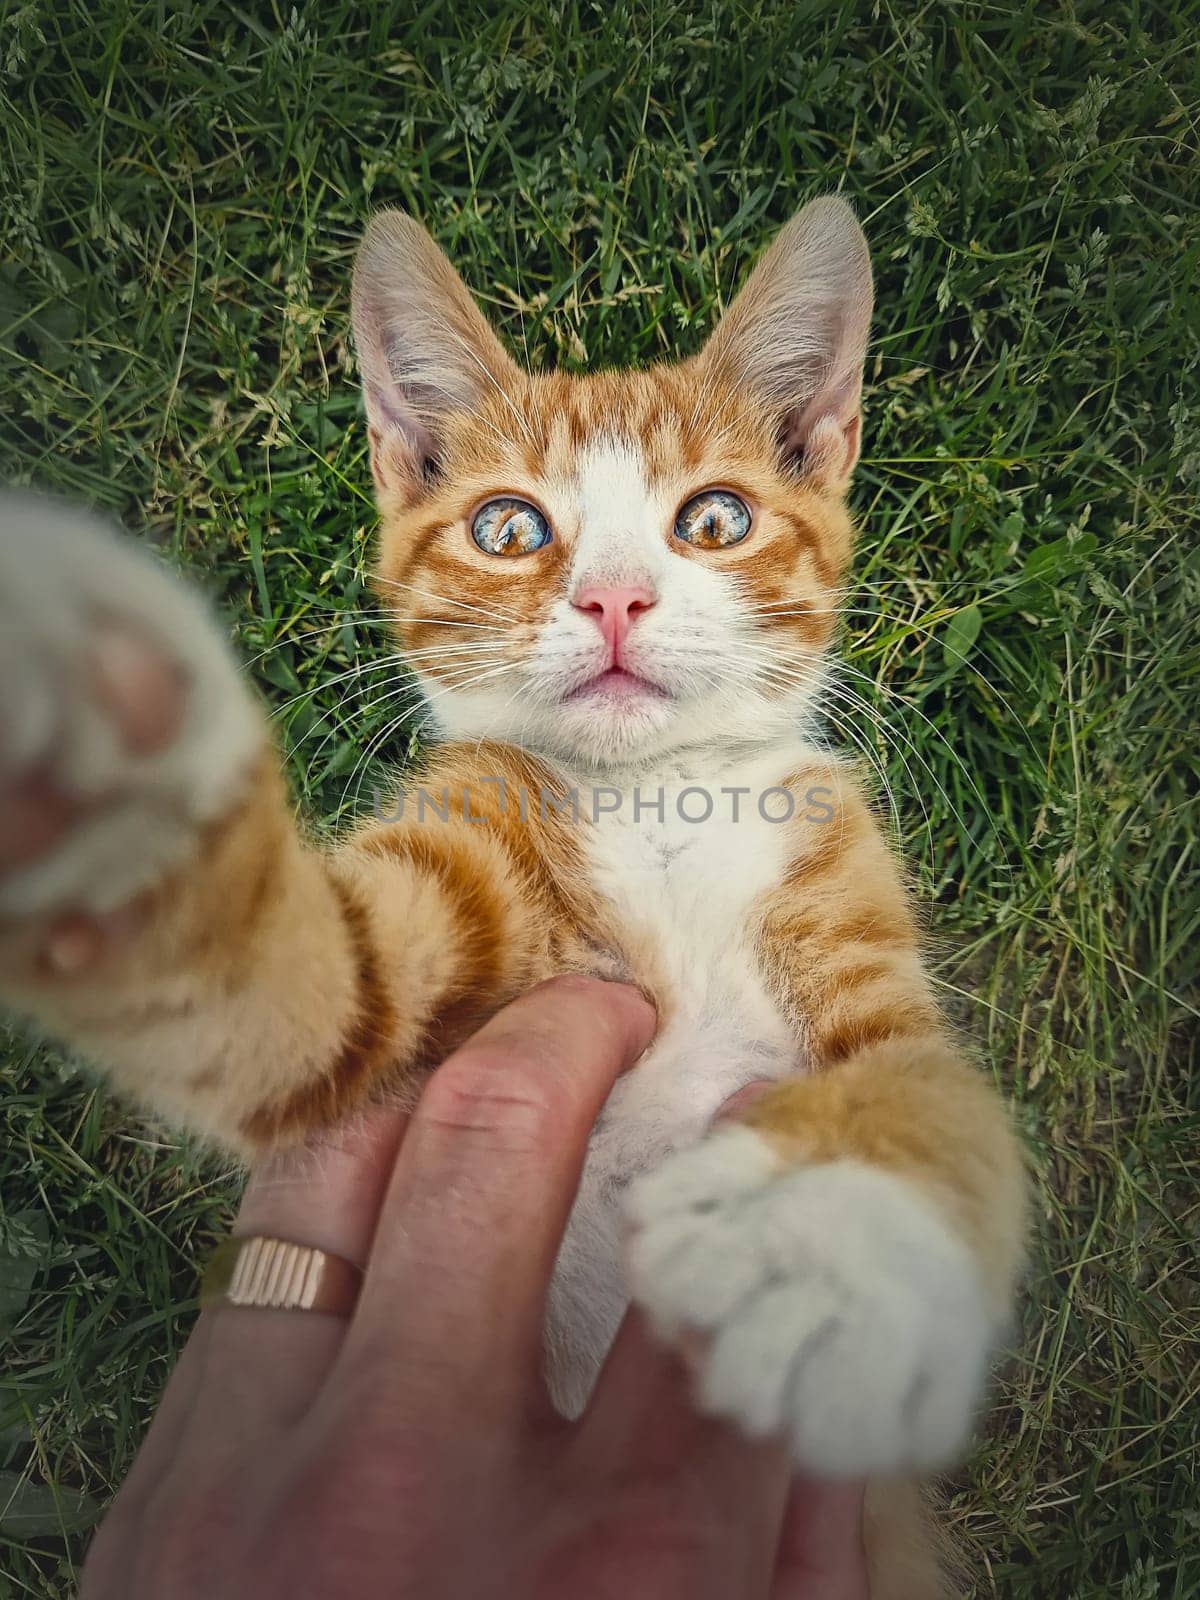 Owner petting his orange tomcat. Playful ginger cat lying on his back in the green grass. Frisky kitten, cute caressing scene in the nature